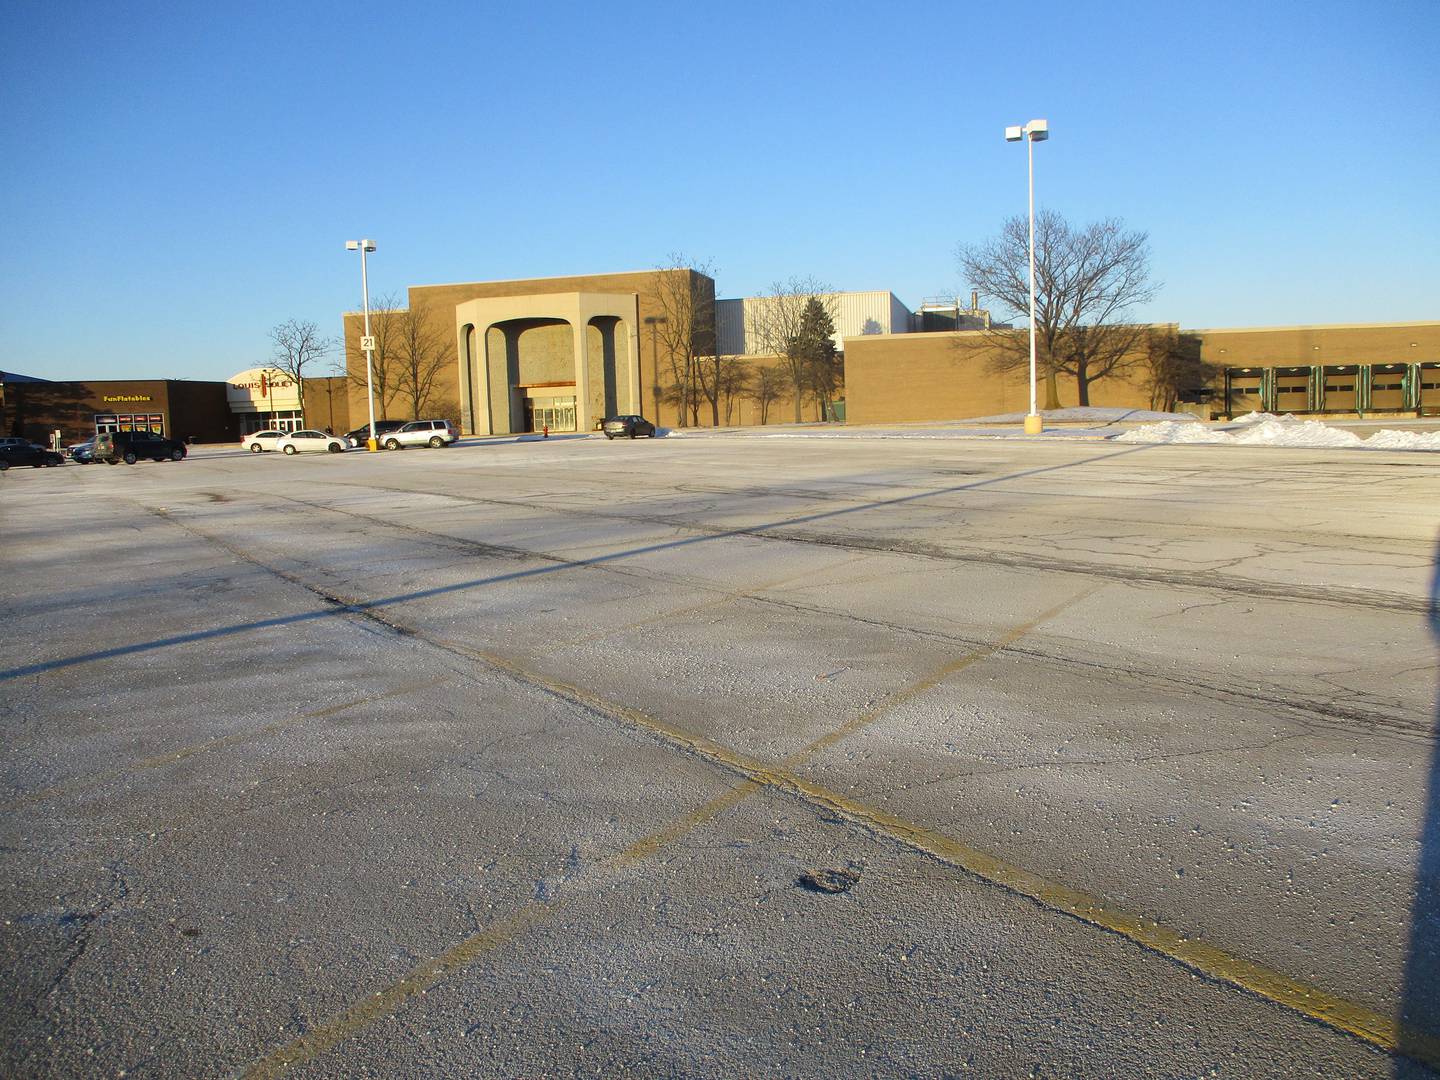 The Sears property at the Louis Joliet Mall, recently acquired by Ghaben Auto Group, includes 16.7 acres and a vast parking area. Jan. 30, 2023.